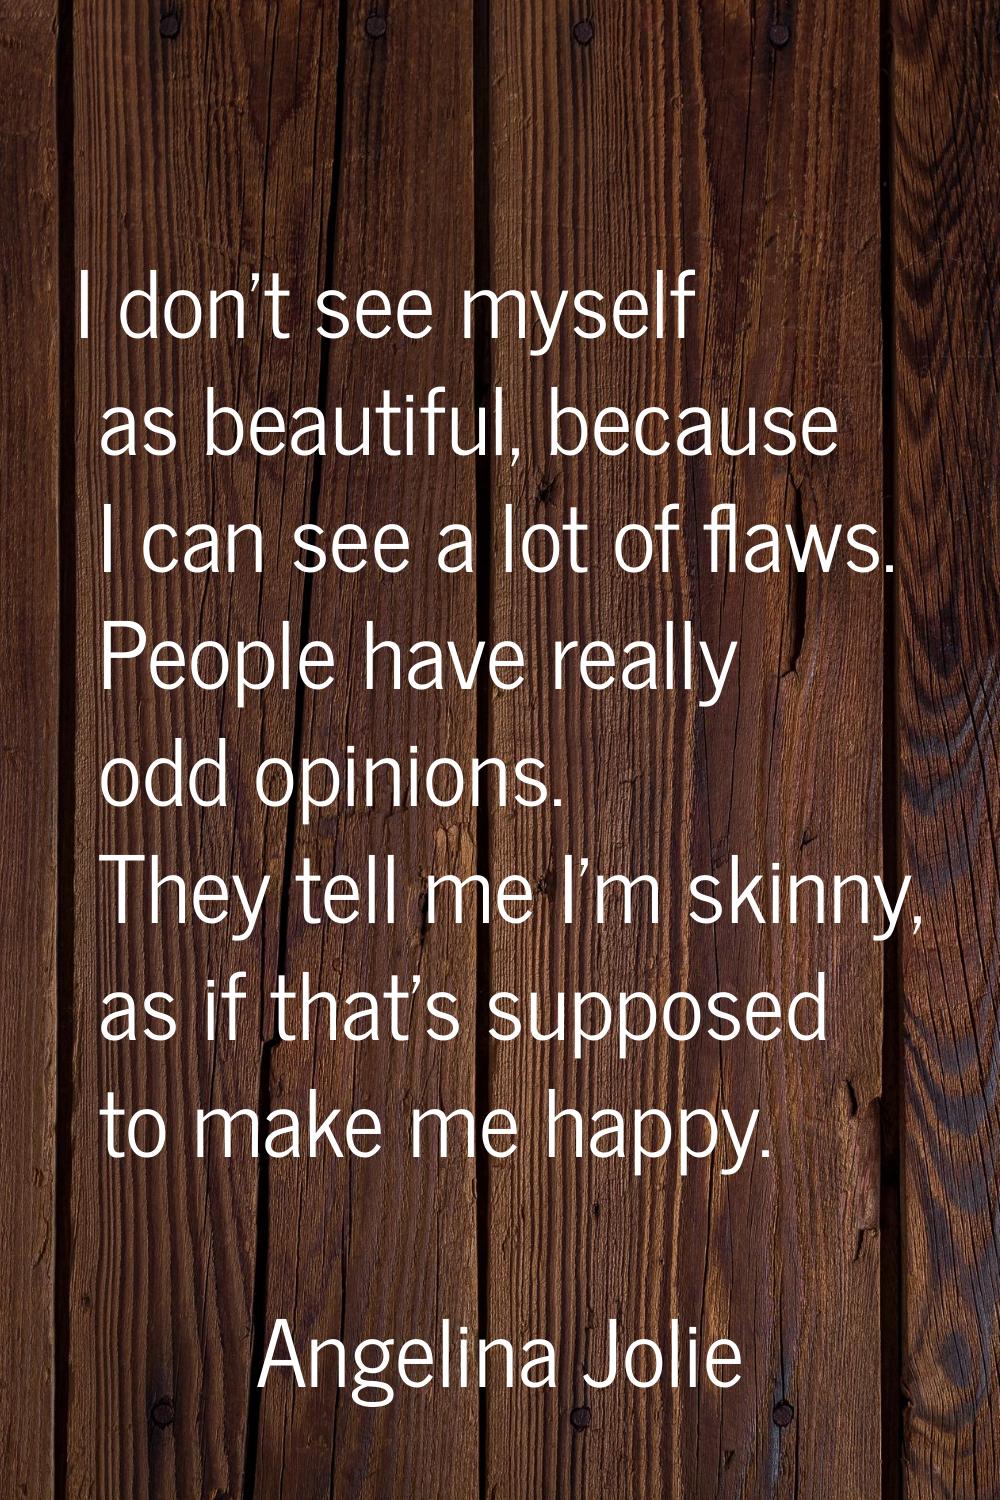 I don't see myself as beautiful, because I can see a lot of flaws. People have really odd opinions.